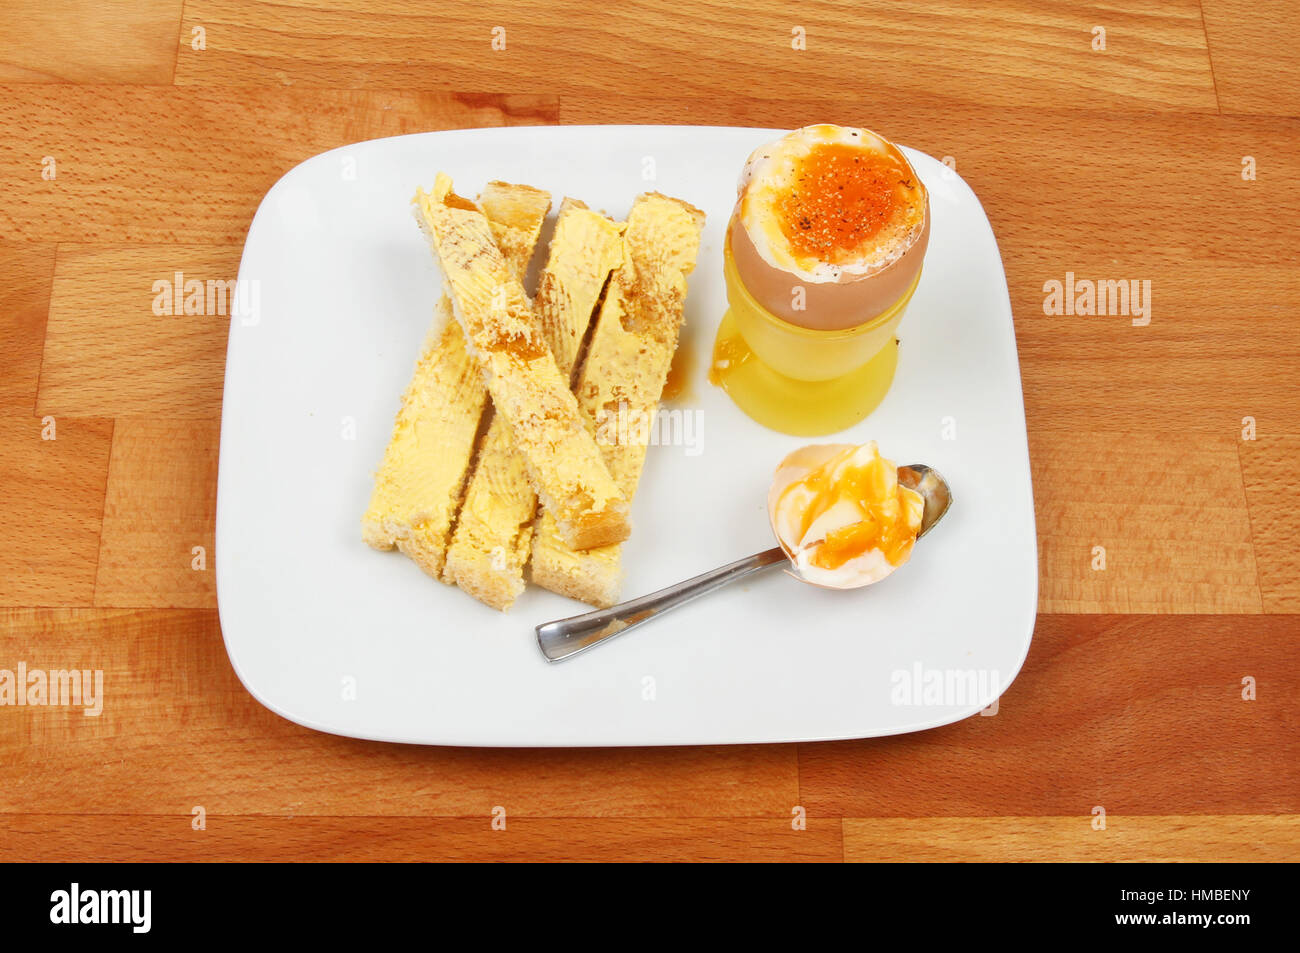 Soft boiled egg and toast on a plate on a wooden kitchen worktop Stock Photo